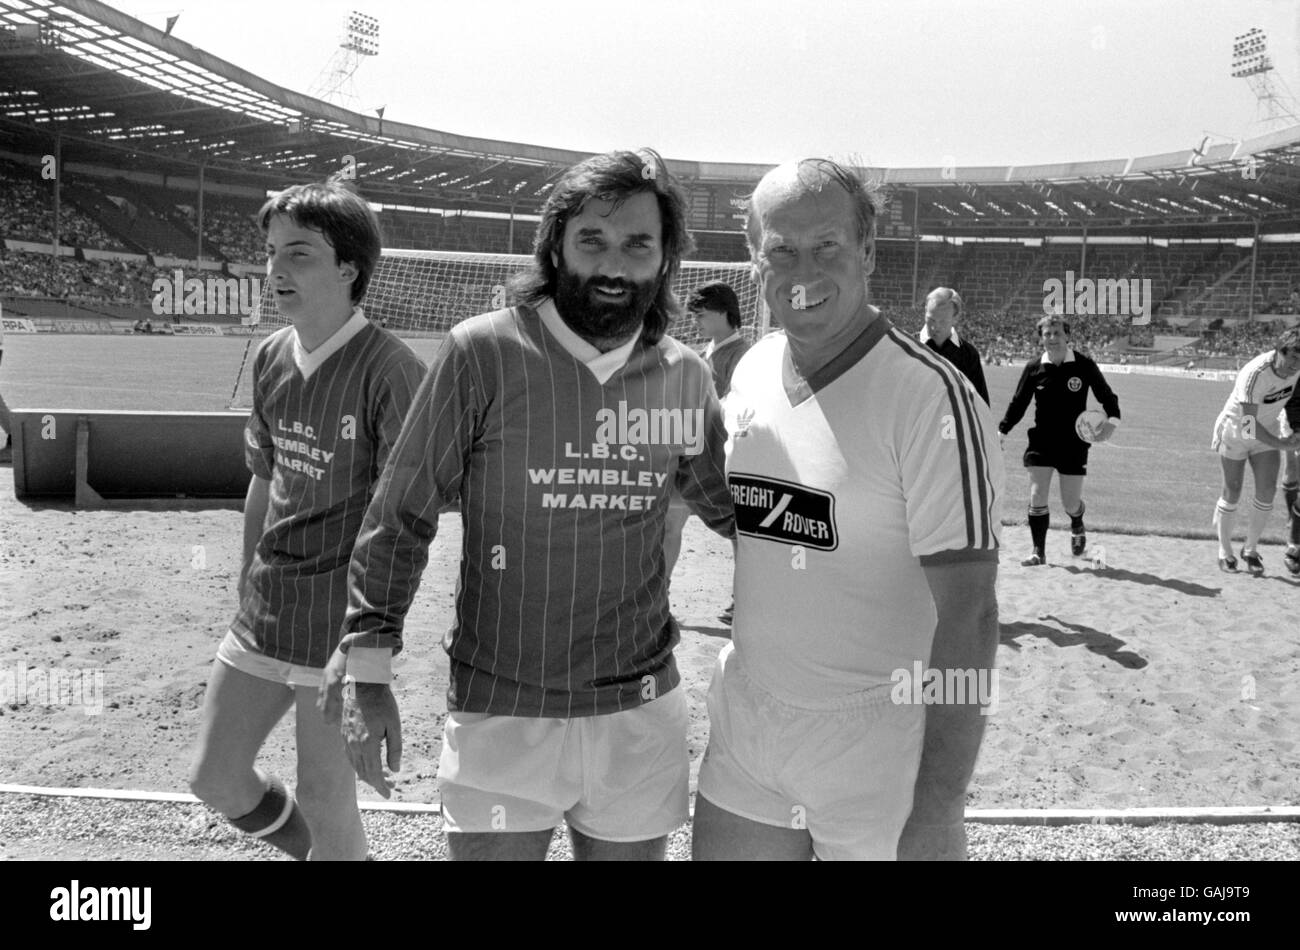 Former Manchester United teammates, LBC XI's George Best (c) and England All Stars' Bobby Charlton (r), put their differences behind them to pose for pictures together at Wembley Stock Photo